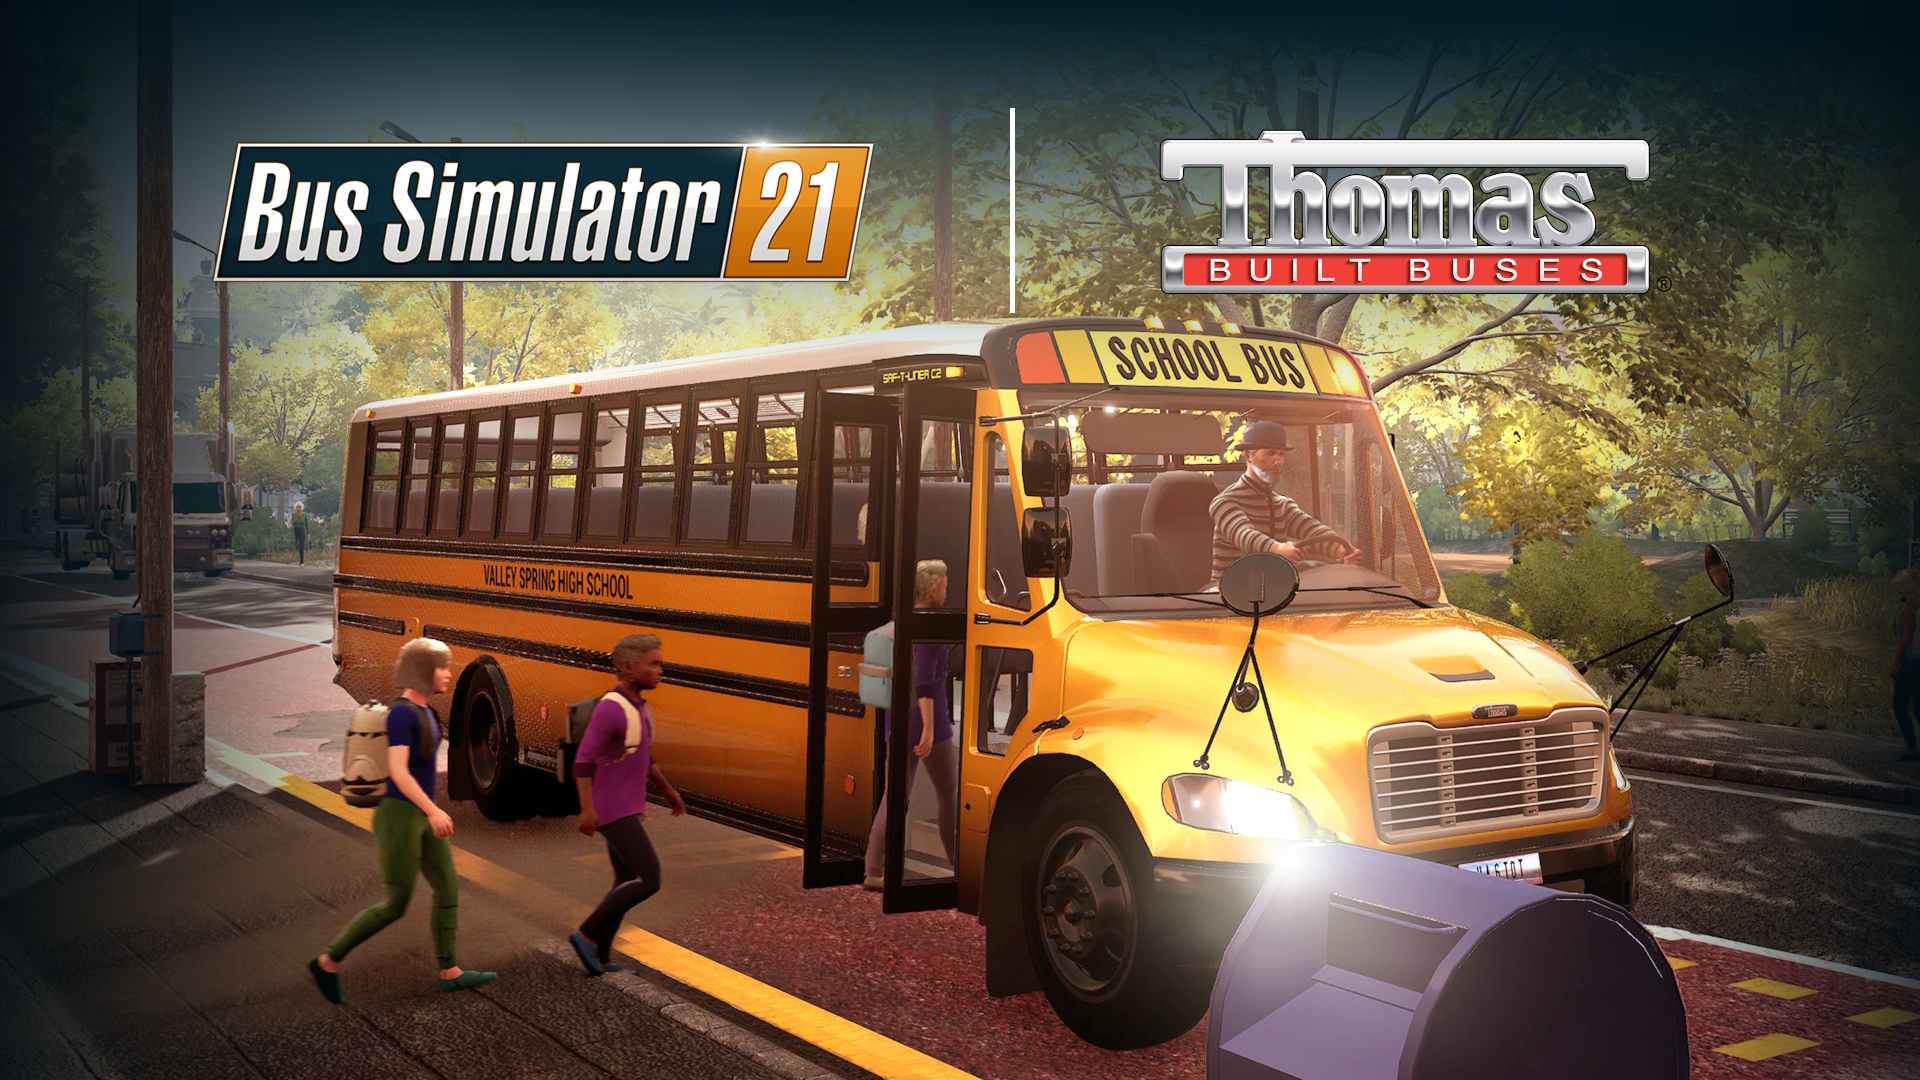 Bus Simulator bus Thomas Bus Built an additional 21 game! the Pack - Stop Next school introduces Buses® for